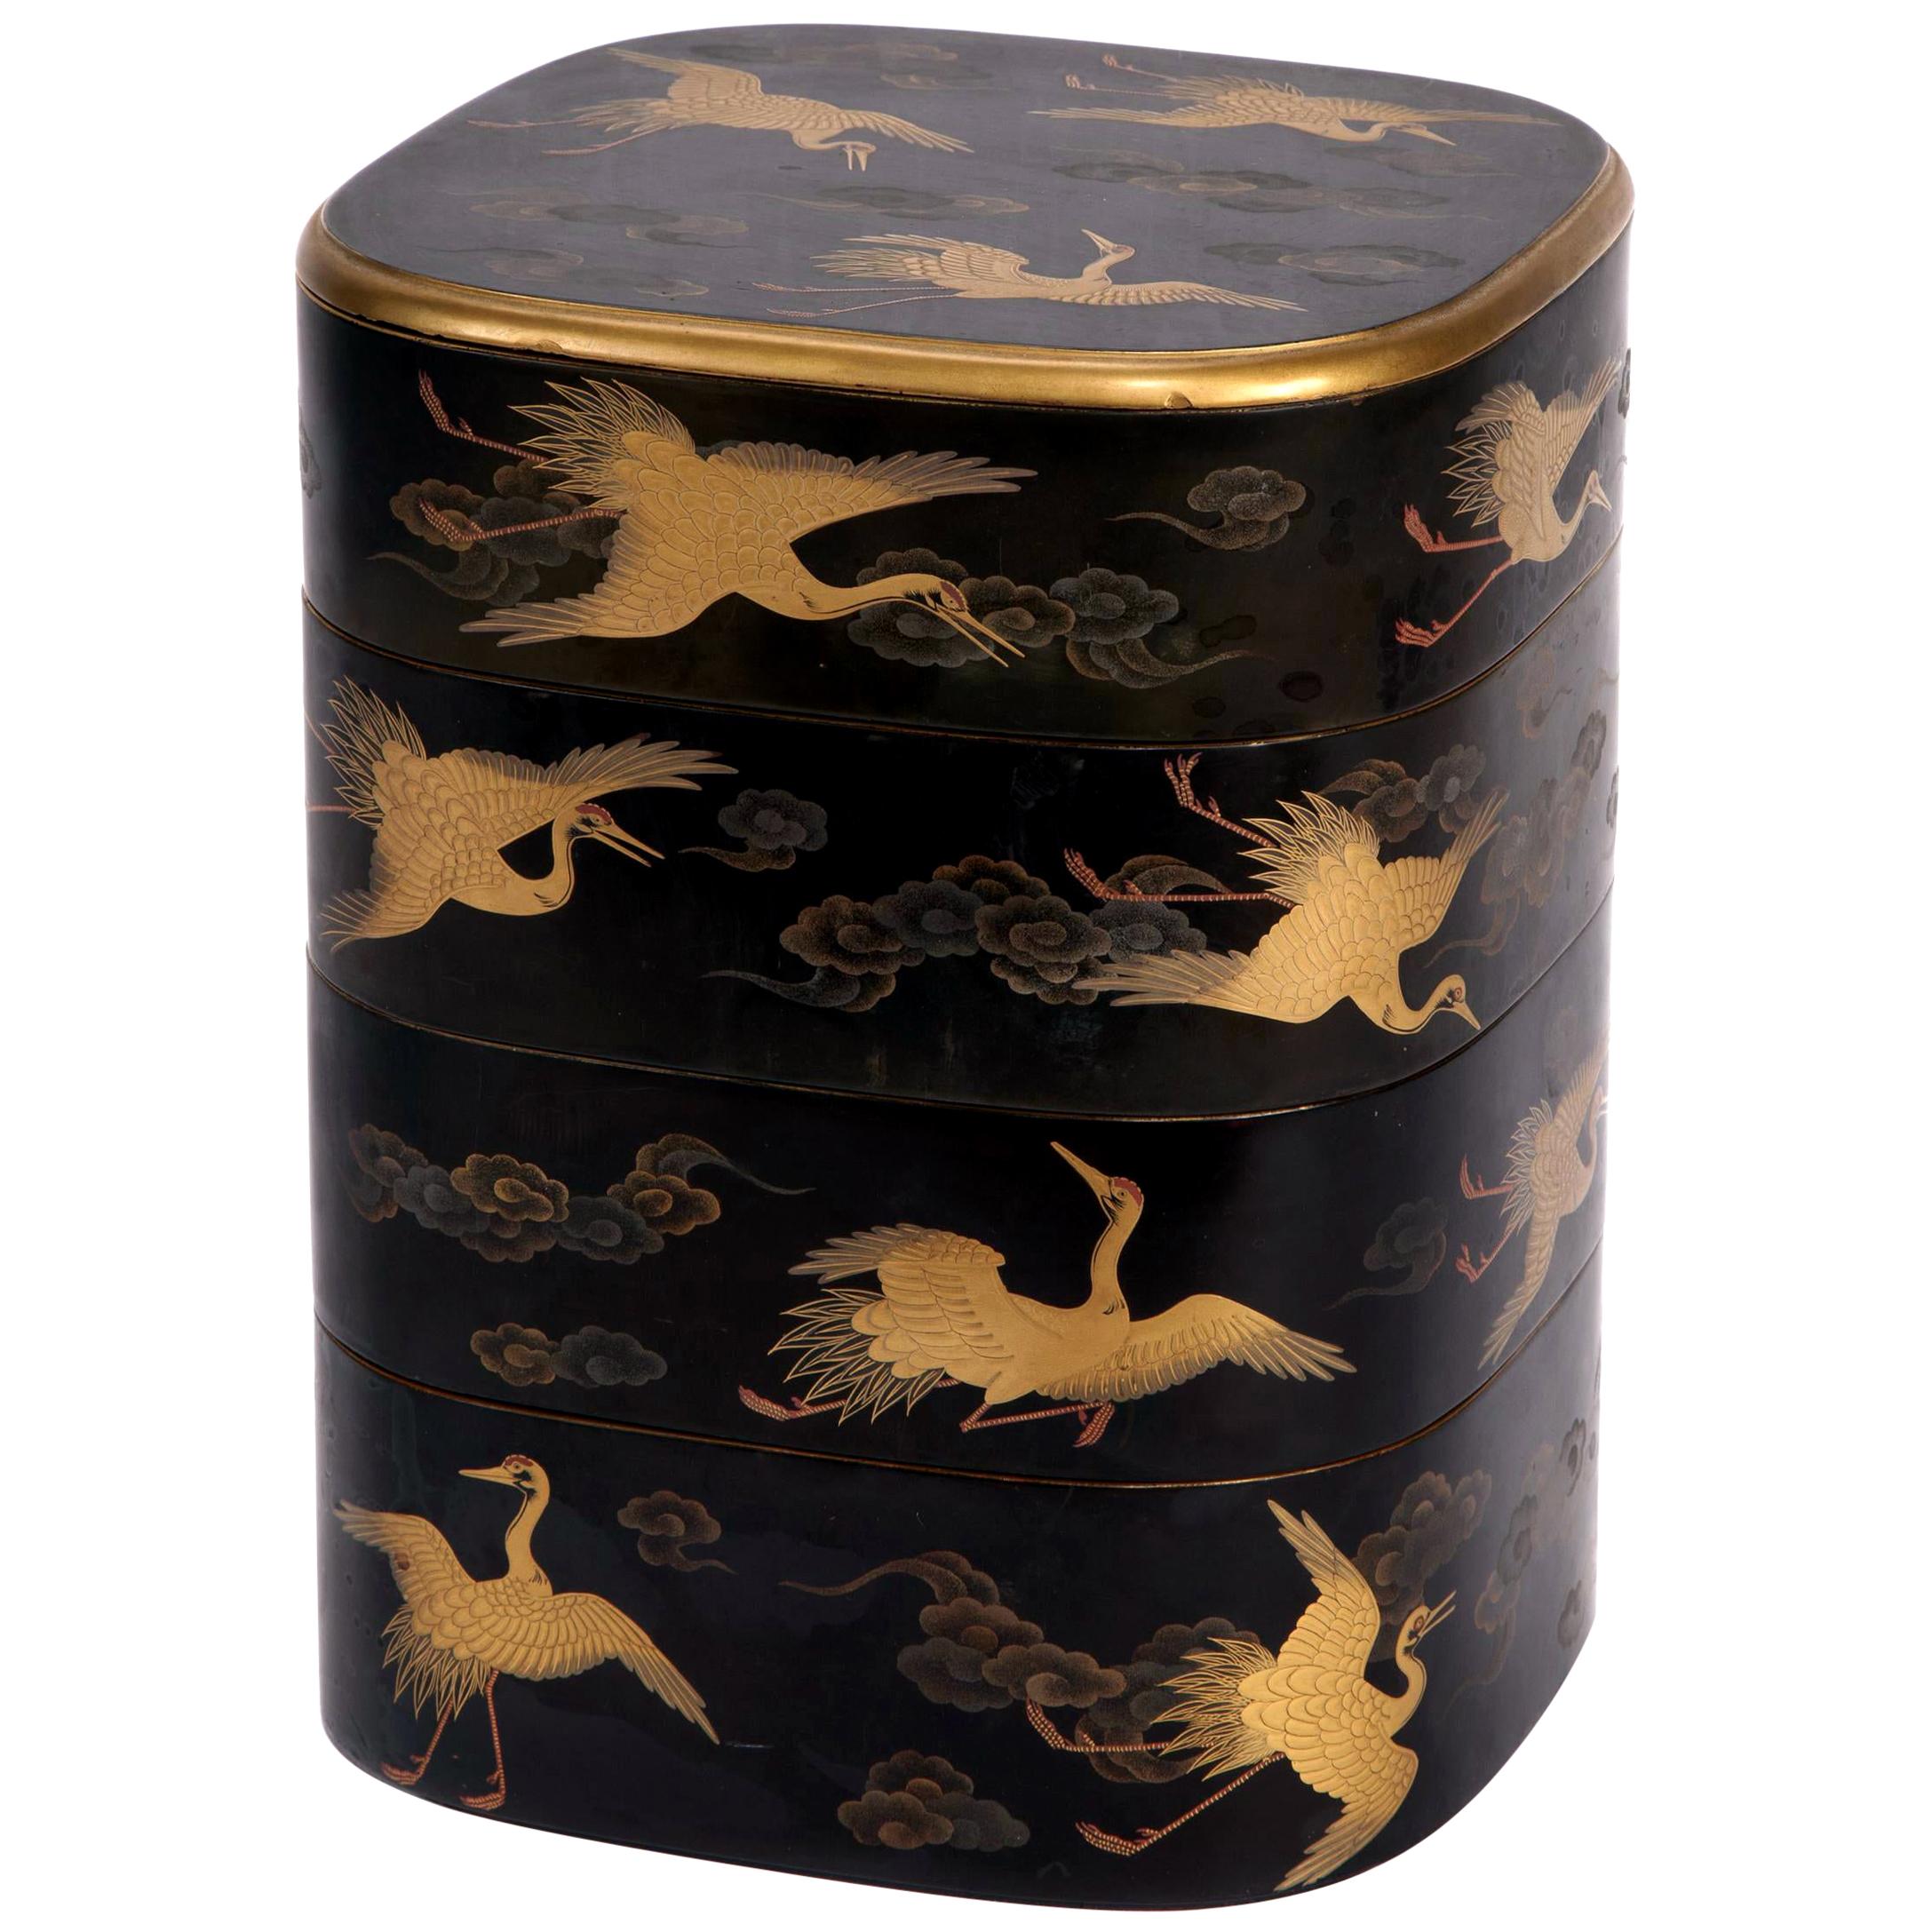 Japanese Lacquered Jubako Box with Crane Design